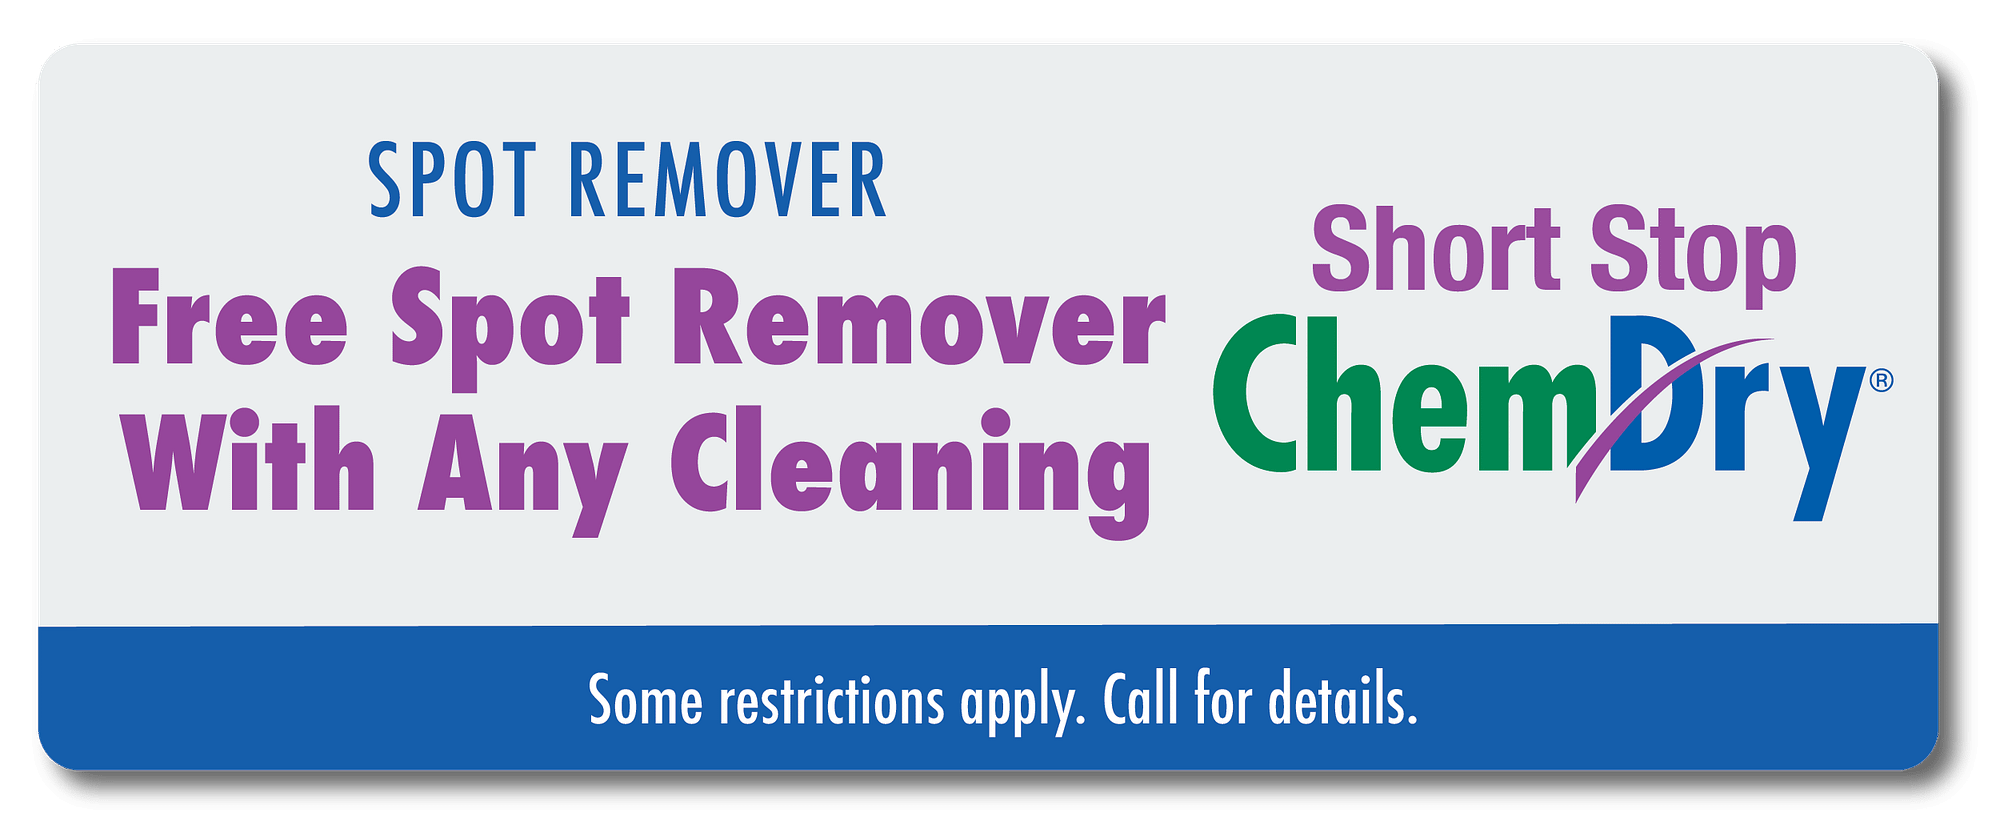 free spot remover with any cleaning coupon